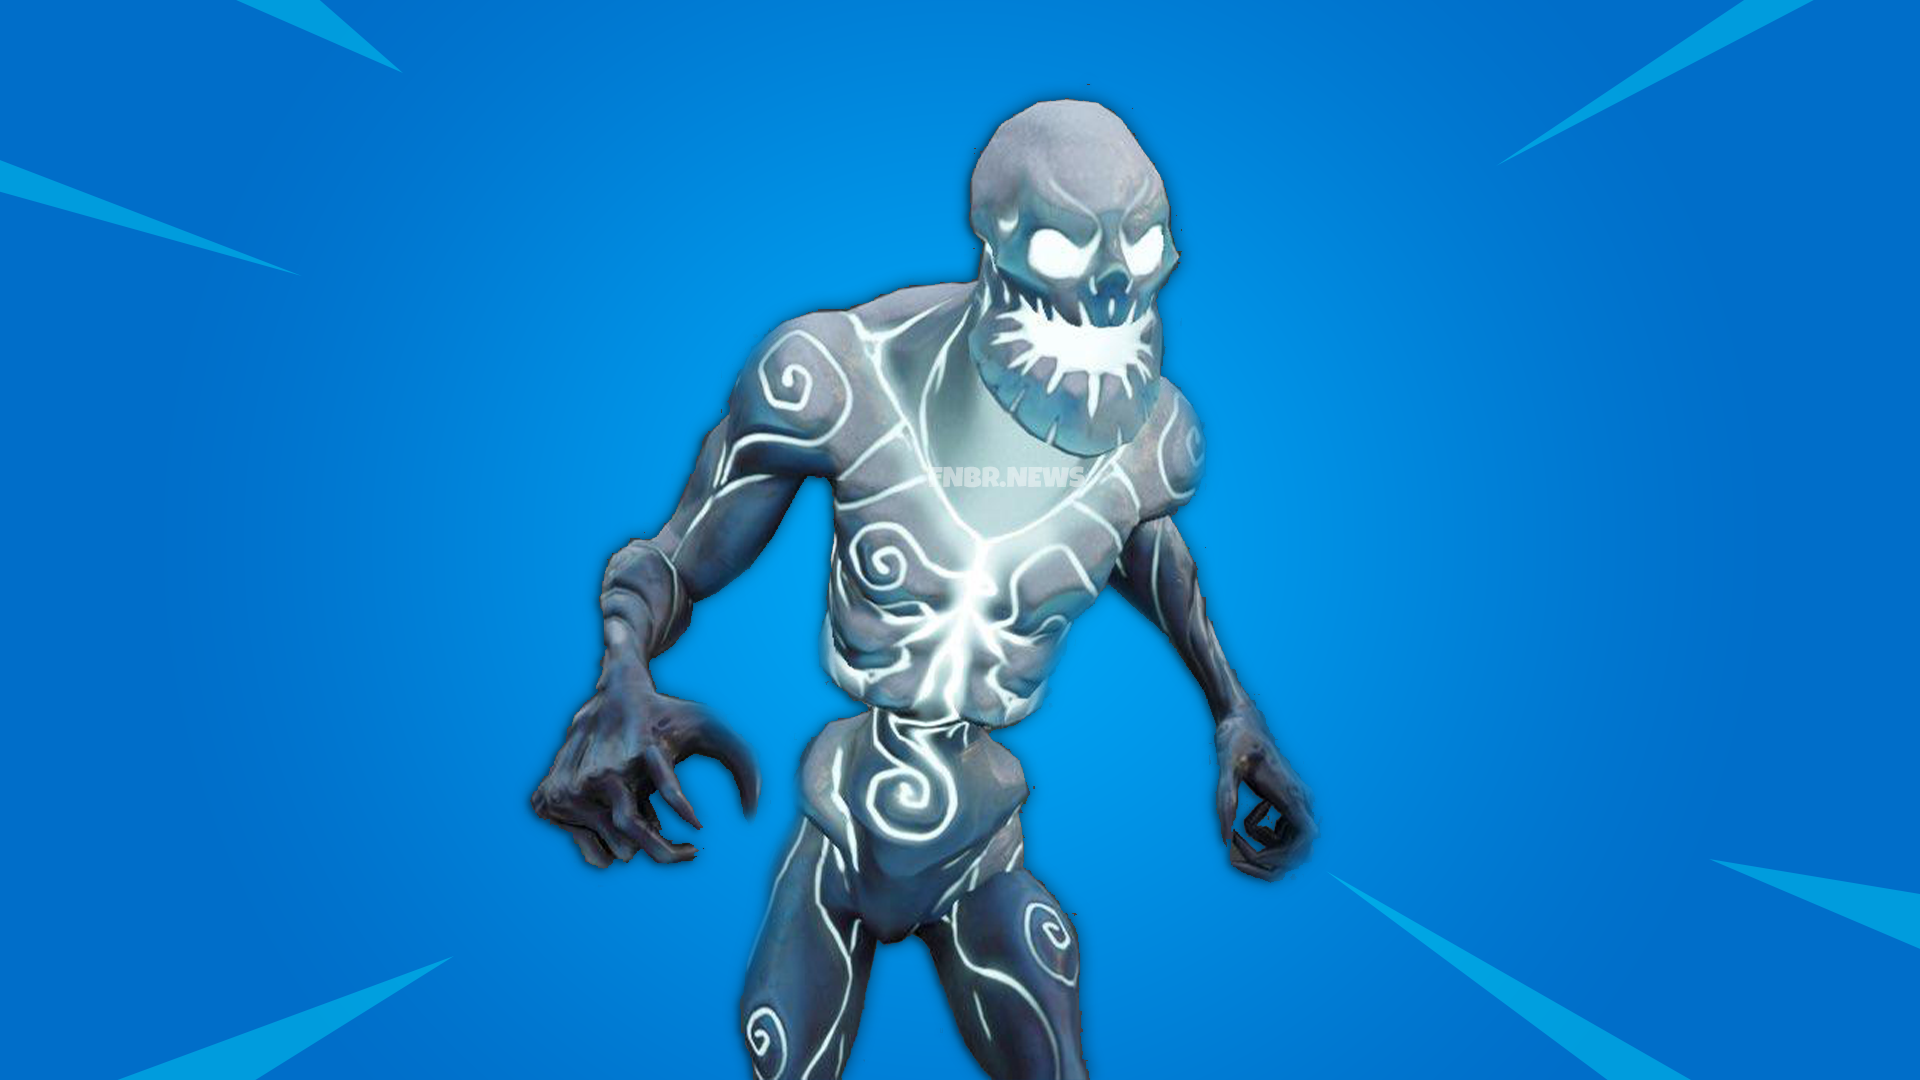 Leak: Ice Fiend From Upcoming Season 7 Event Discovered in Fortnite Files